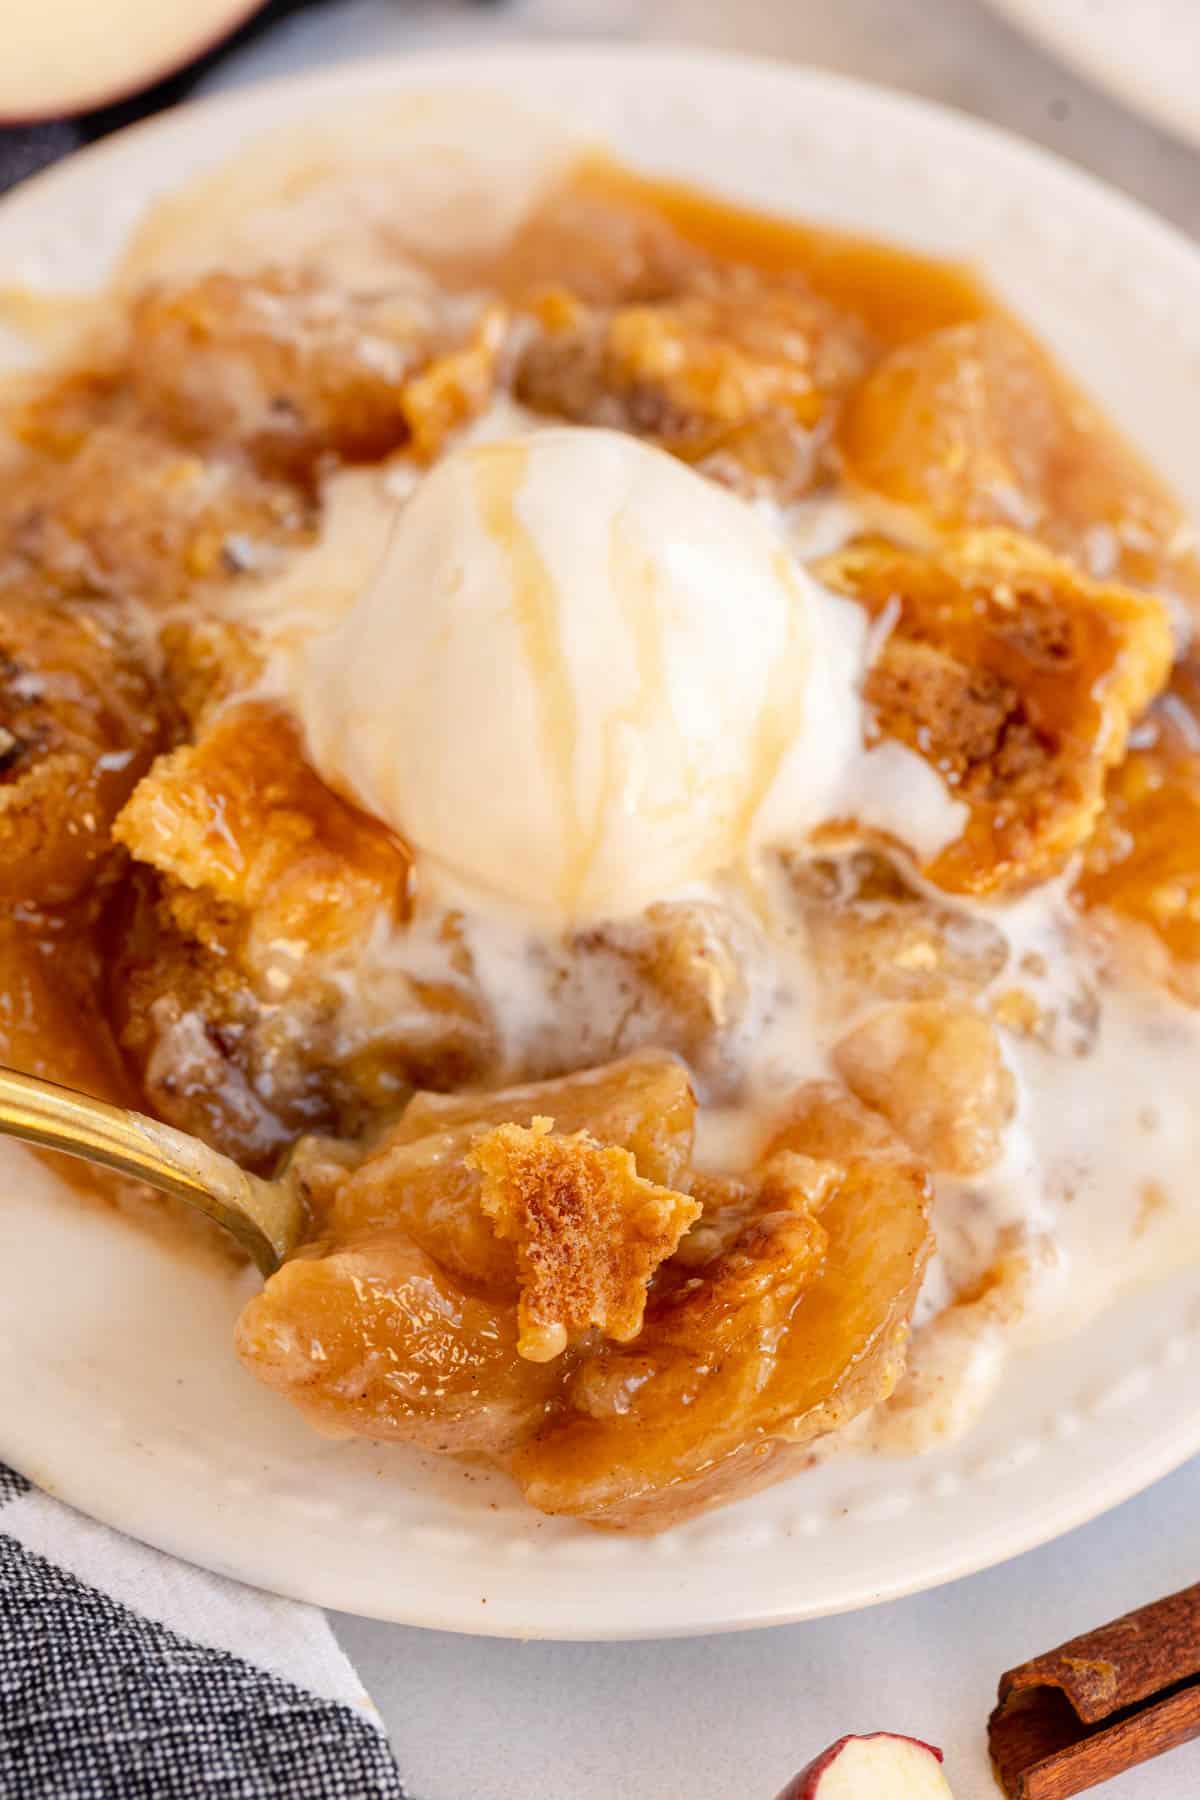 A plate of apple dump cake with ice cream and cinnamon sticks.